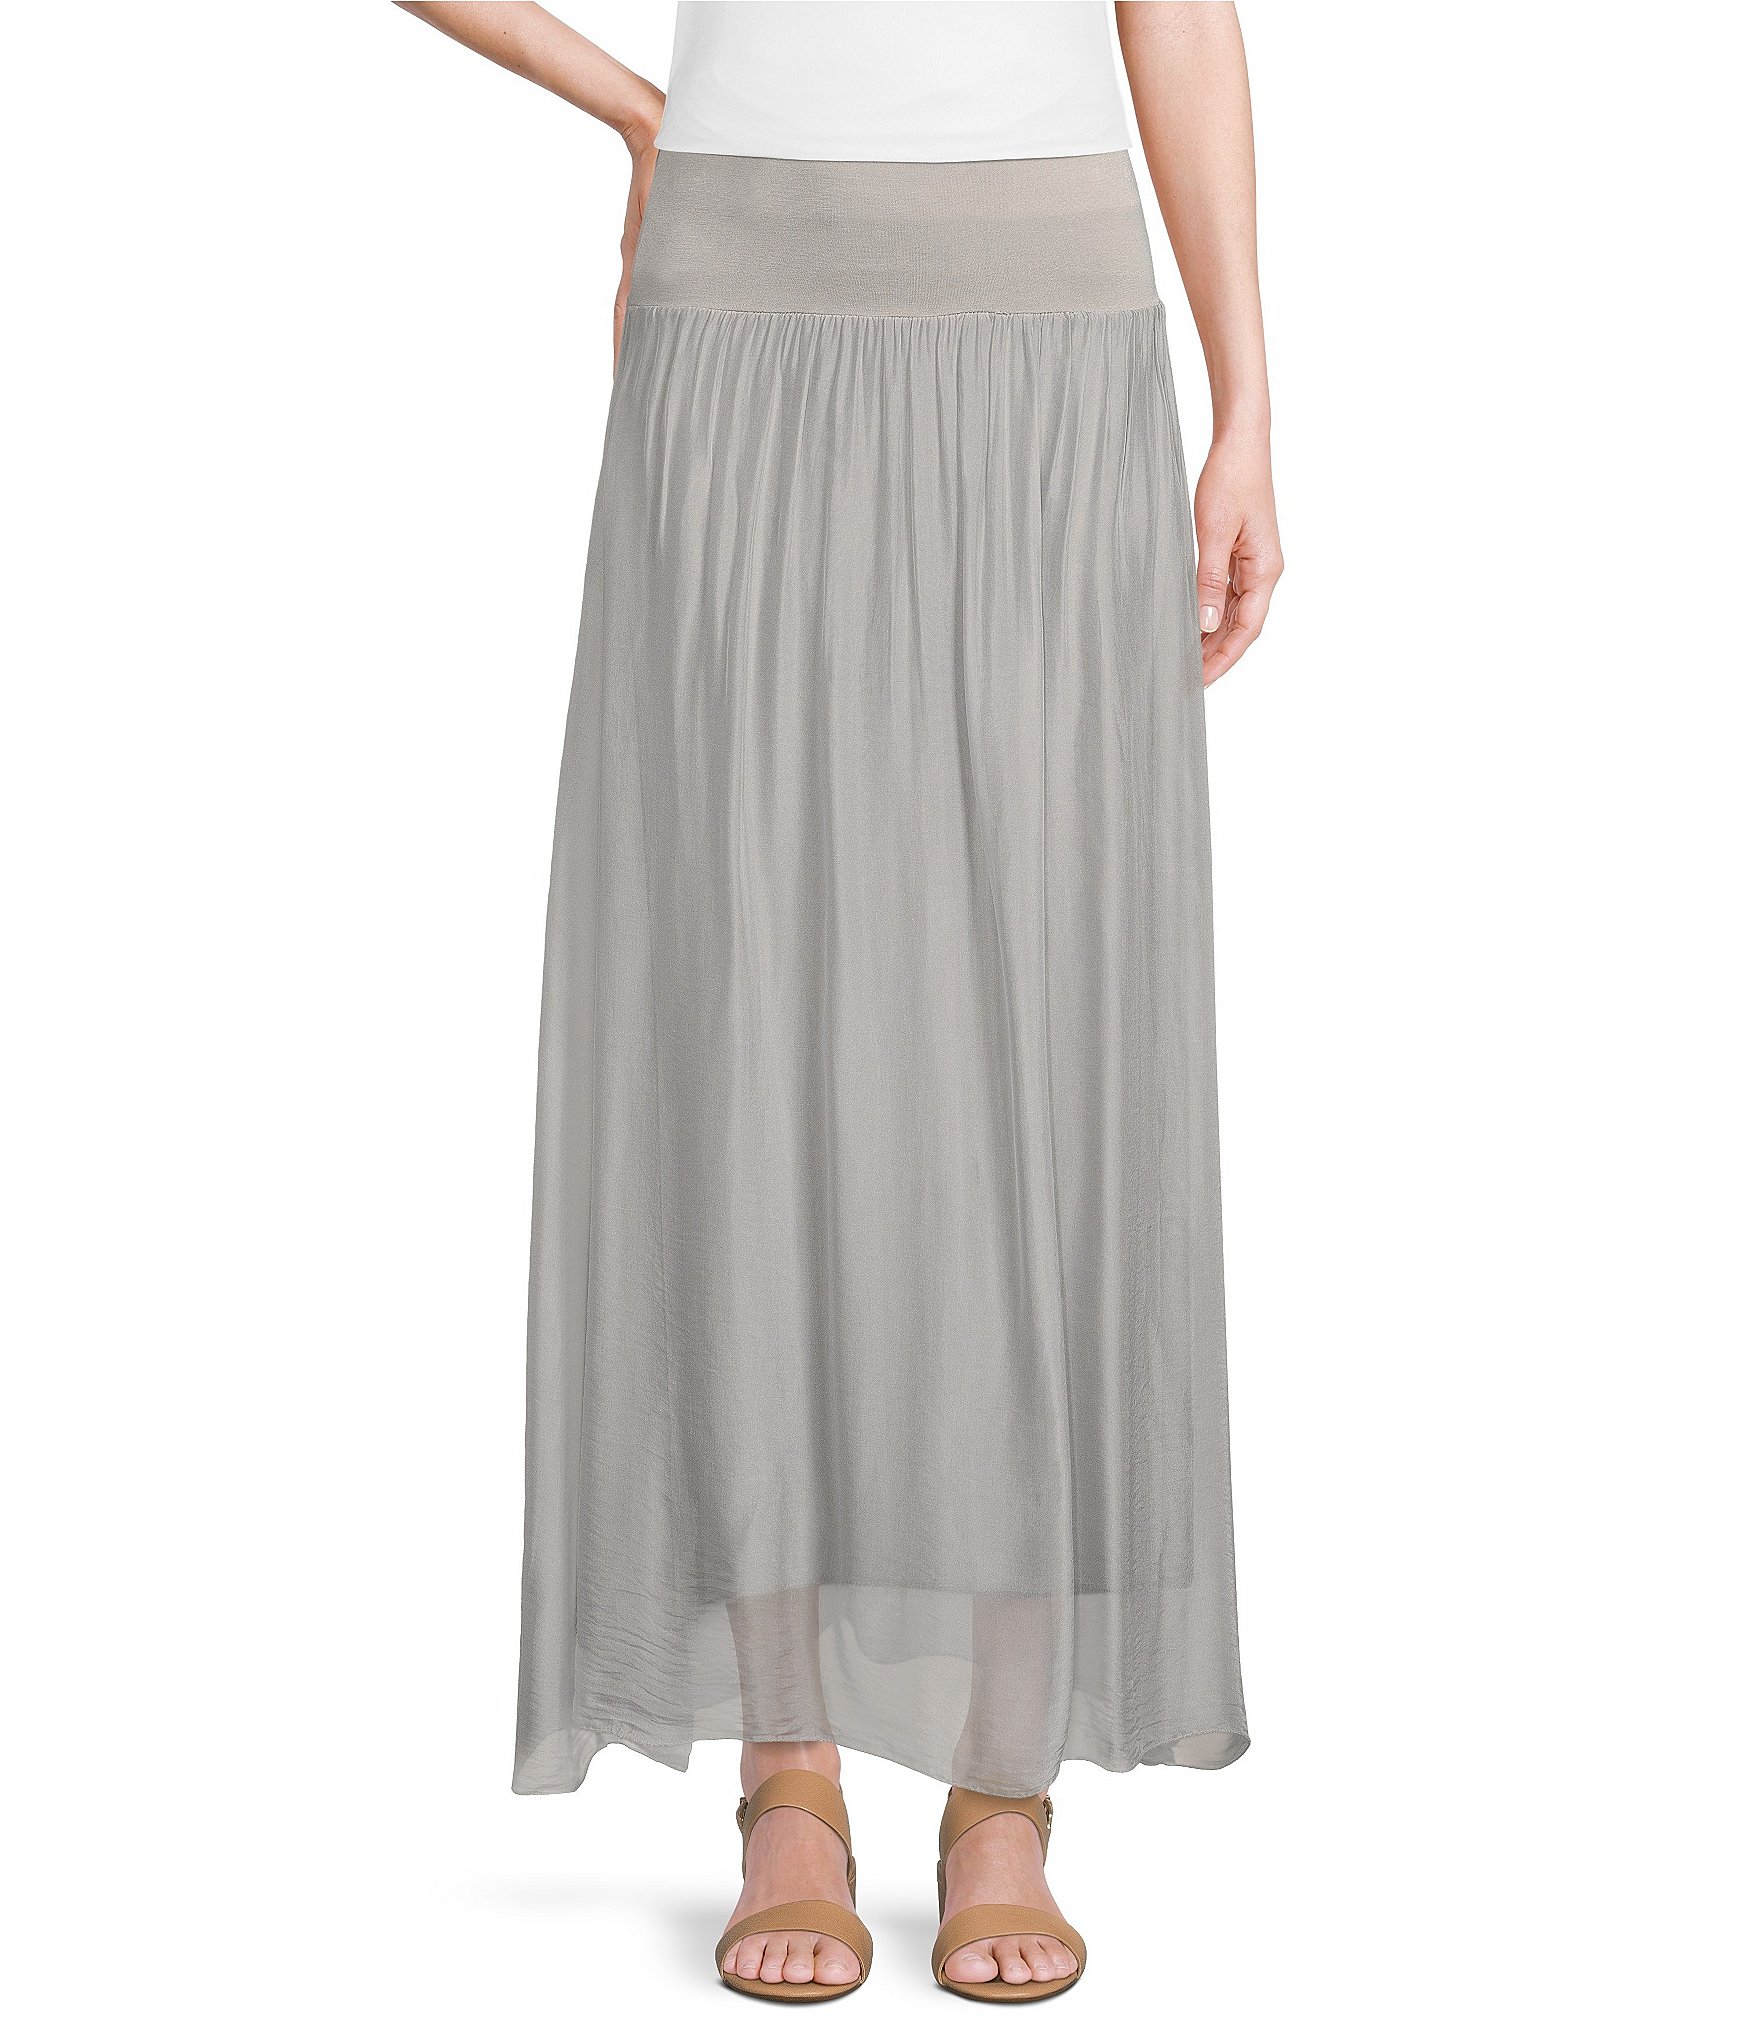 M Made in Italy Solid Woven Silk Pull-On Maxi Skirt | Dillard's